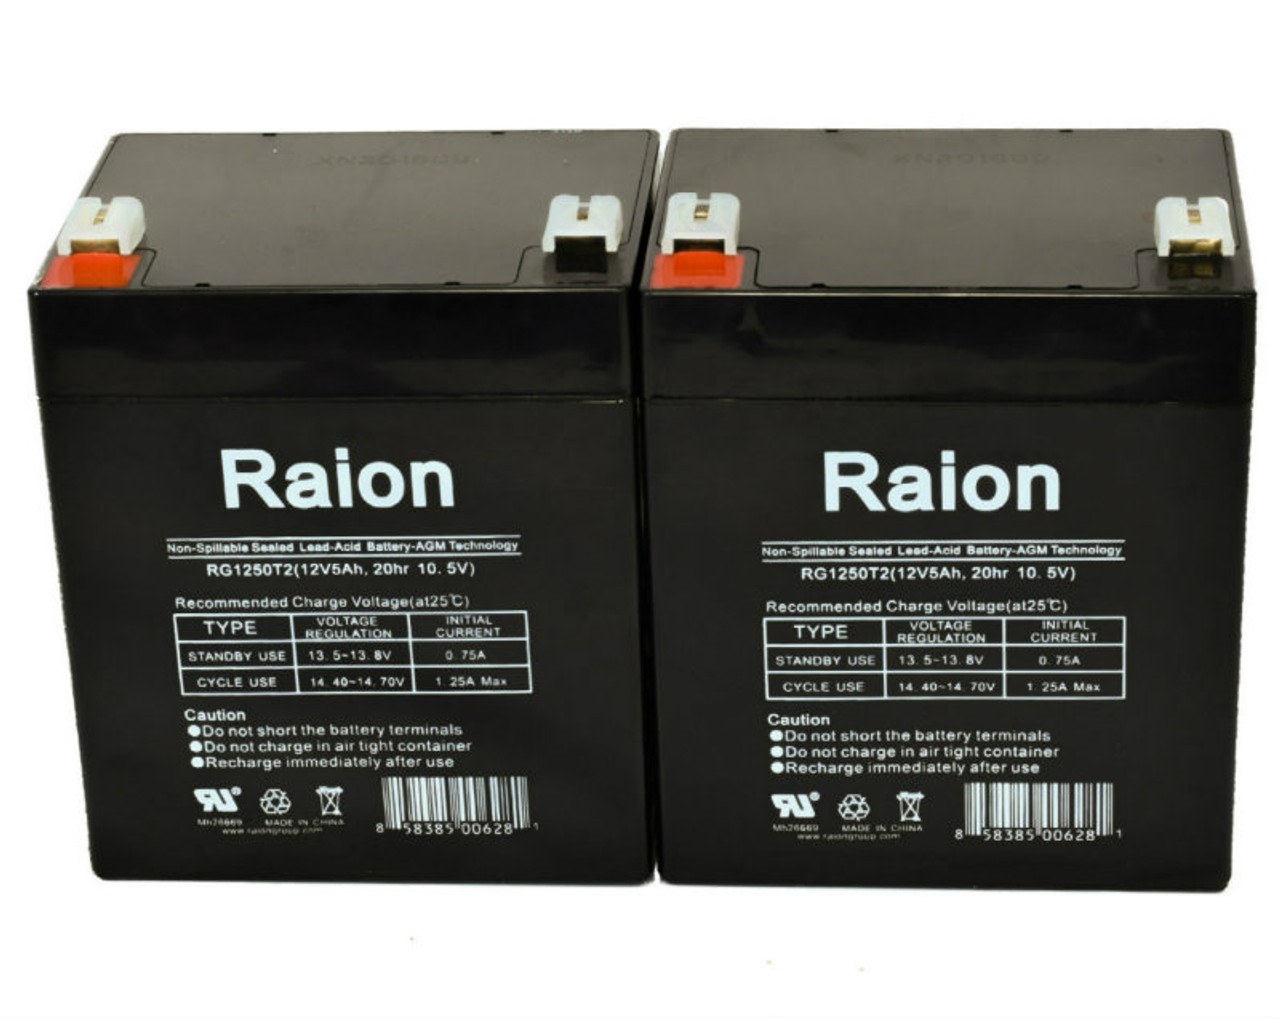 Raion Power 12V 5Ah RG1250T2 Replacement Lead Acid Battery for Newmox FNC-1245-F2 - 2 Pack